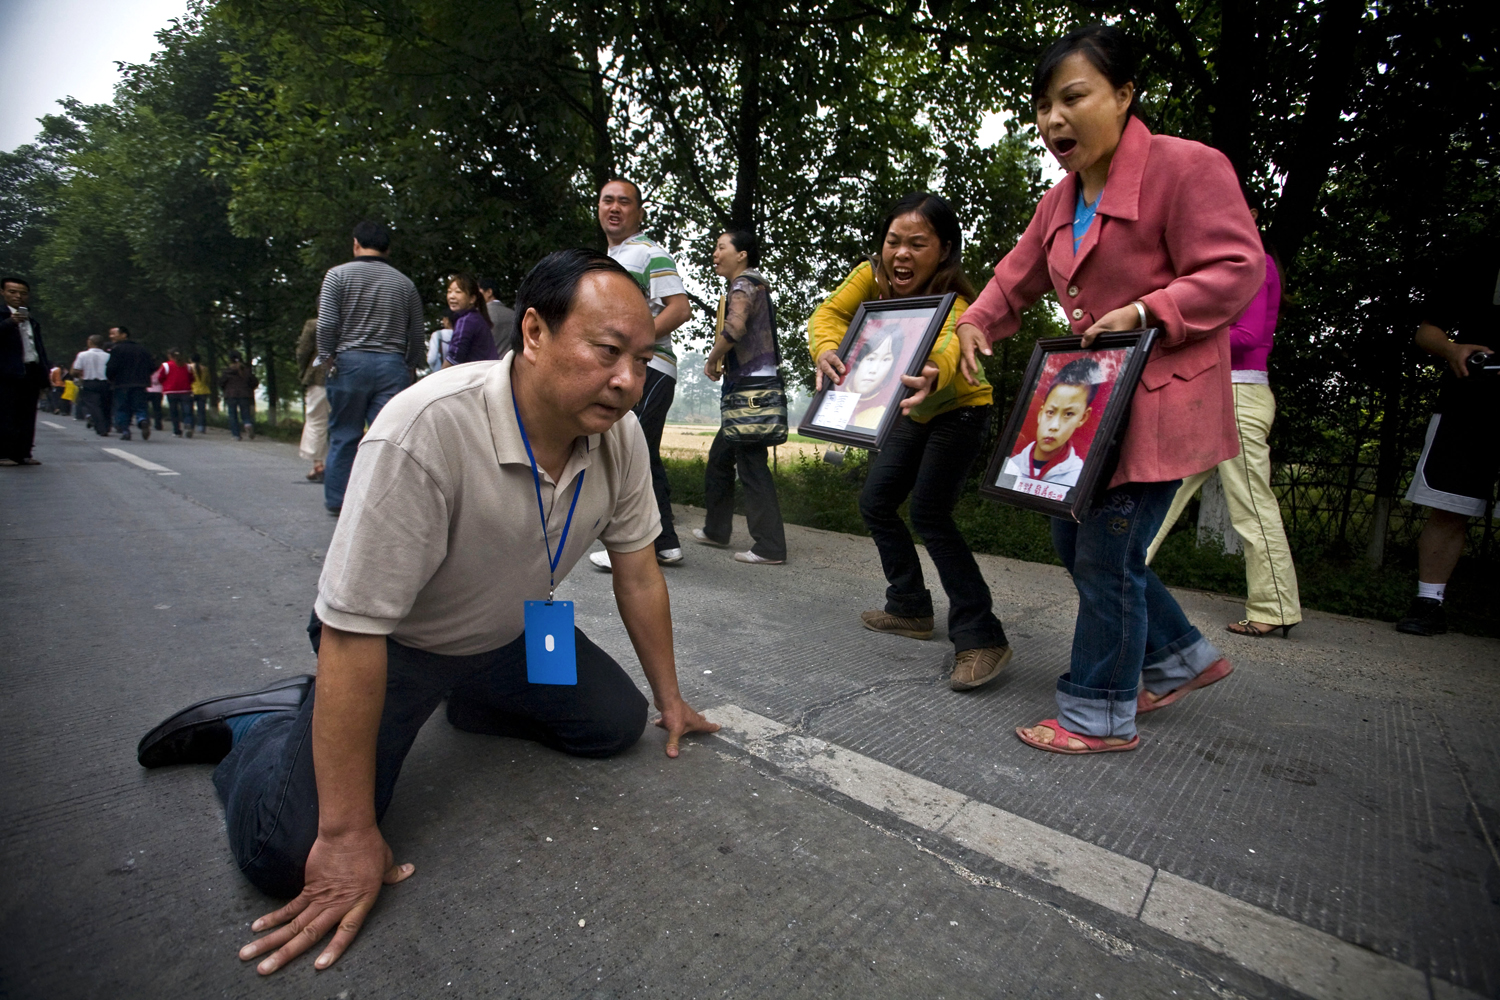 2006: Shiho Fukada
                              Jiang Guohua, the Communist Party secretary of Mianzhu city, kneels on the ground pleading with protesting parents, whose children were killed in a school collapse during China's recent devastating earthquake, not to complain to higher authorities, in Mianzhu, Sichuan province on May 25, 2008. Despite Jiang's pleas, the parents of the 127 children who died in the collapse kept marching Sunday and eventually met with higher officials, who told them the government would investigate.
                              
                               Advice—keep shooting. It was just so inspiring to be there with other talented participants and mentors that weekend. The passion and love that people have for photojournalism really lifted me up and made me believe in what we do.